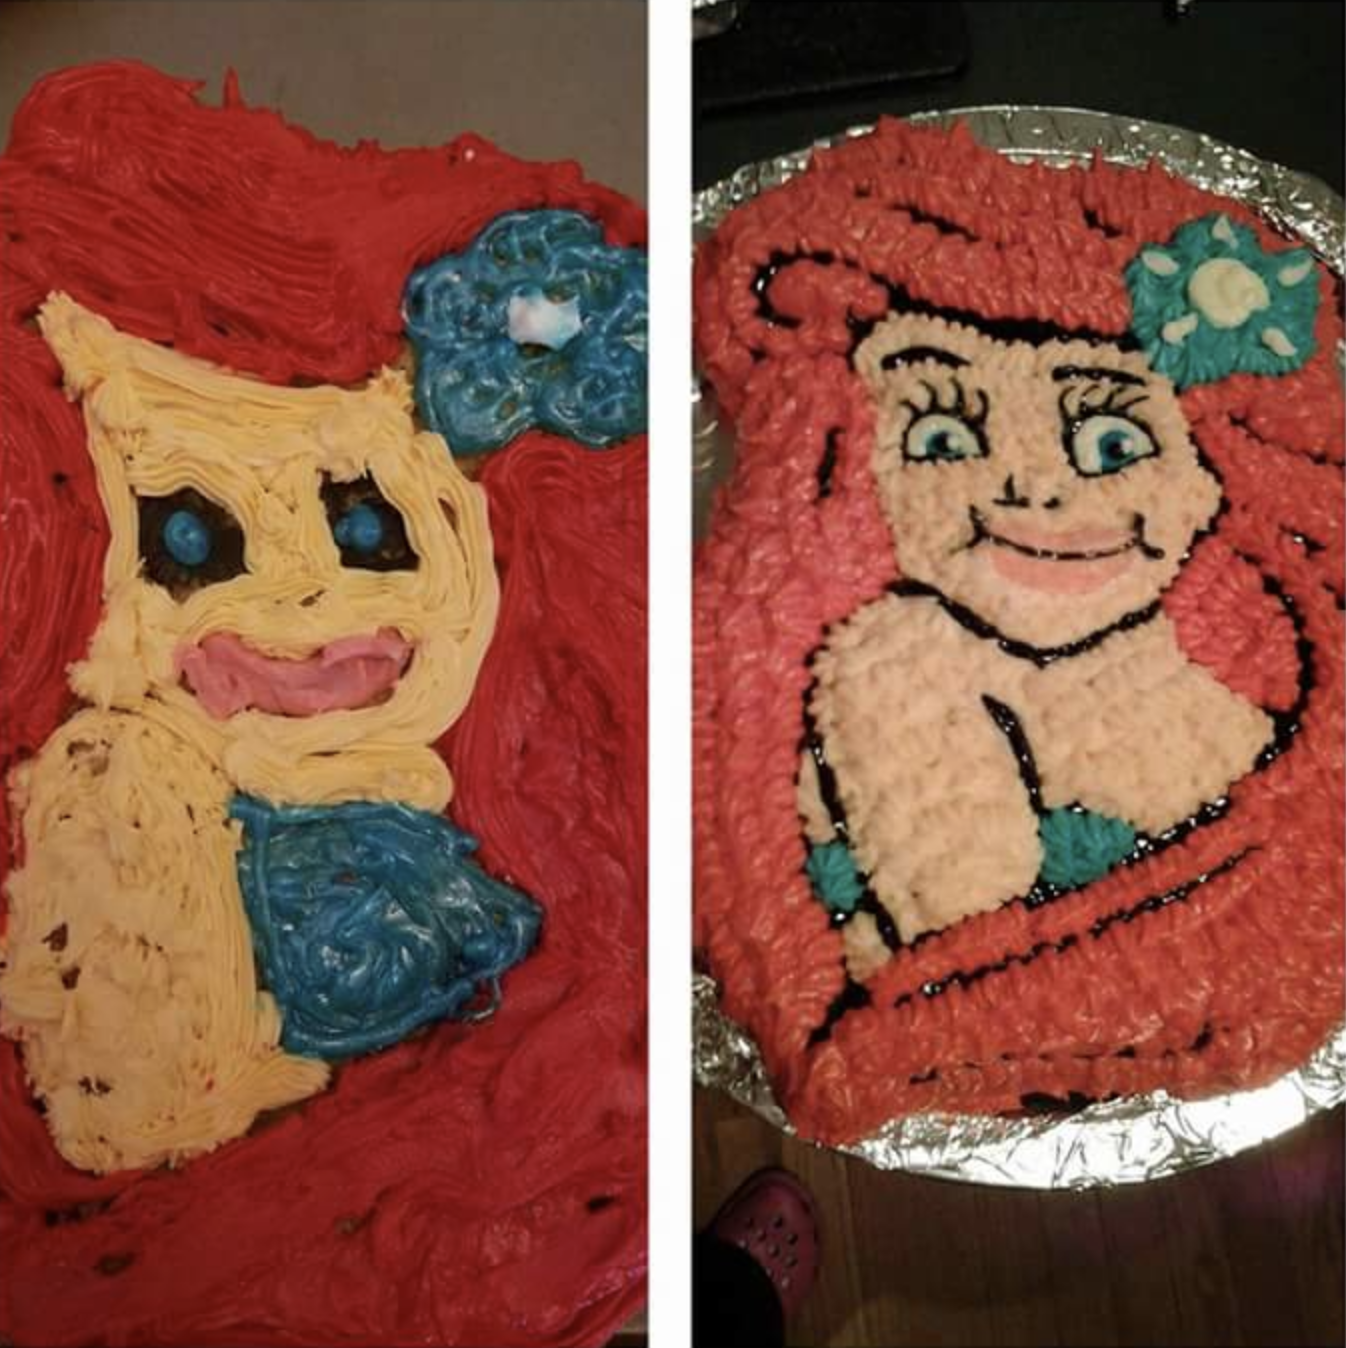 Cake Fails: The Worst In Baking History (PHOTOS) | HuffPost Life